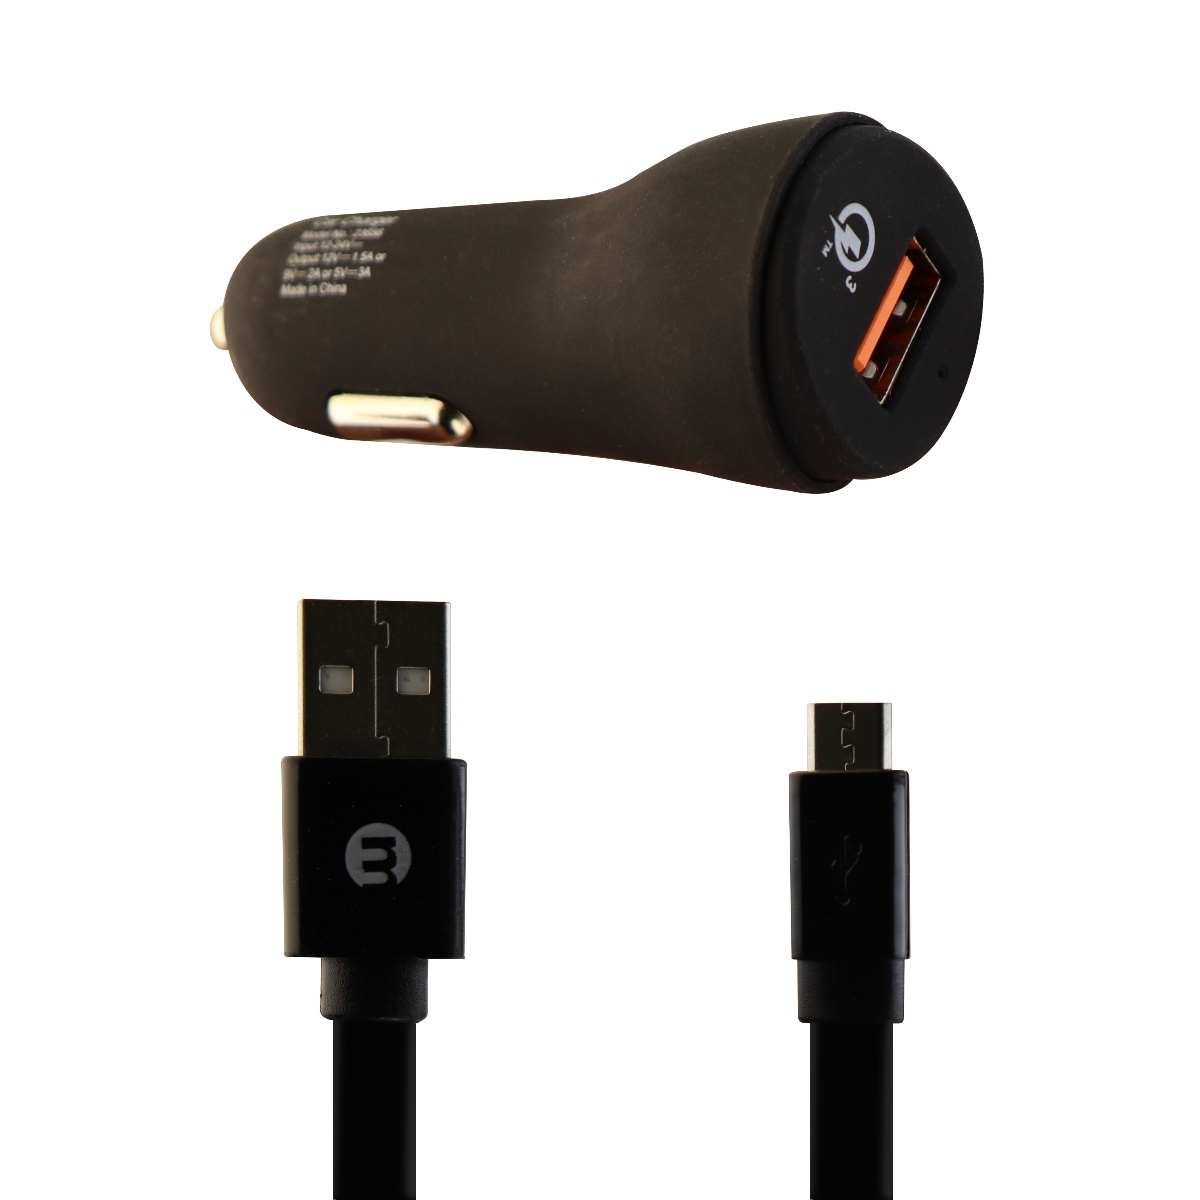 MWorks MPower Car Charger With Micro USB Cable Sync Cable Pack - Black